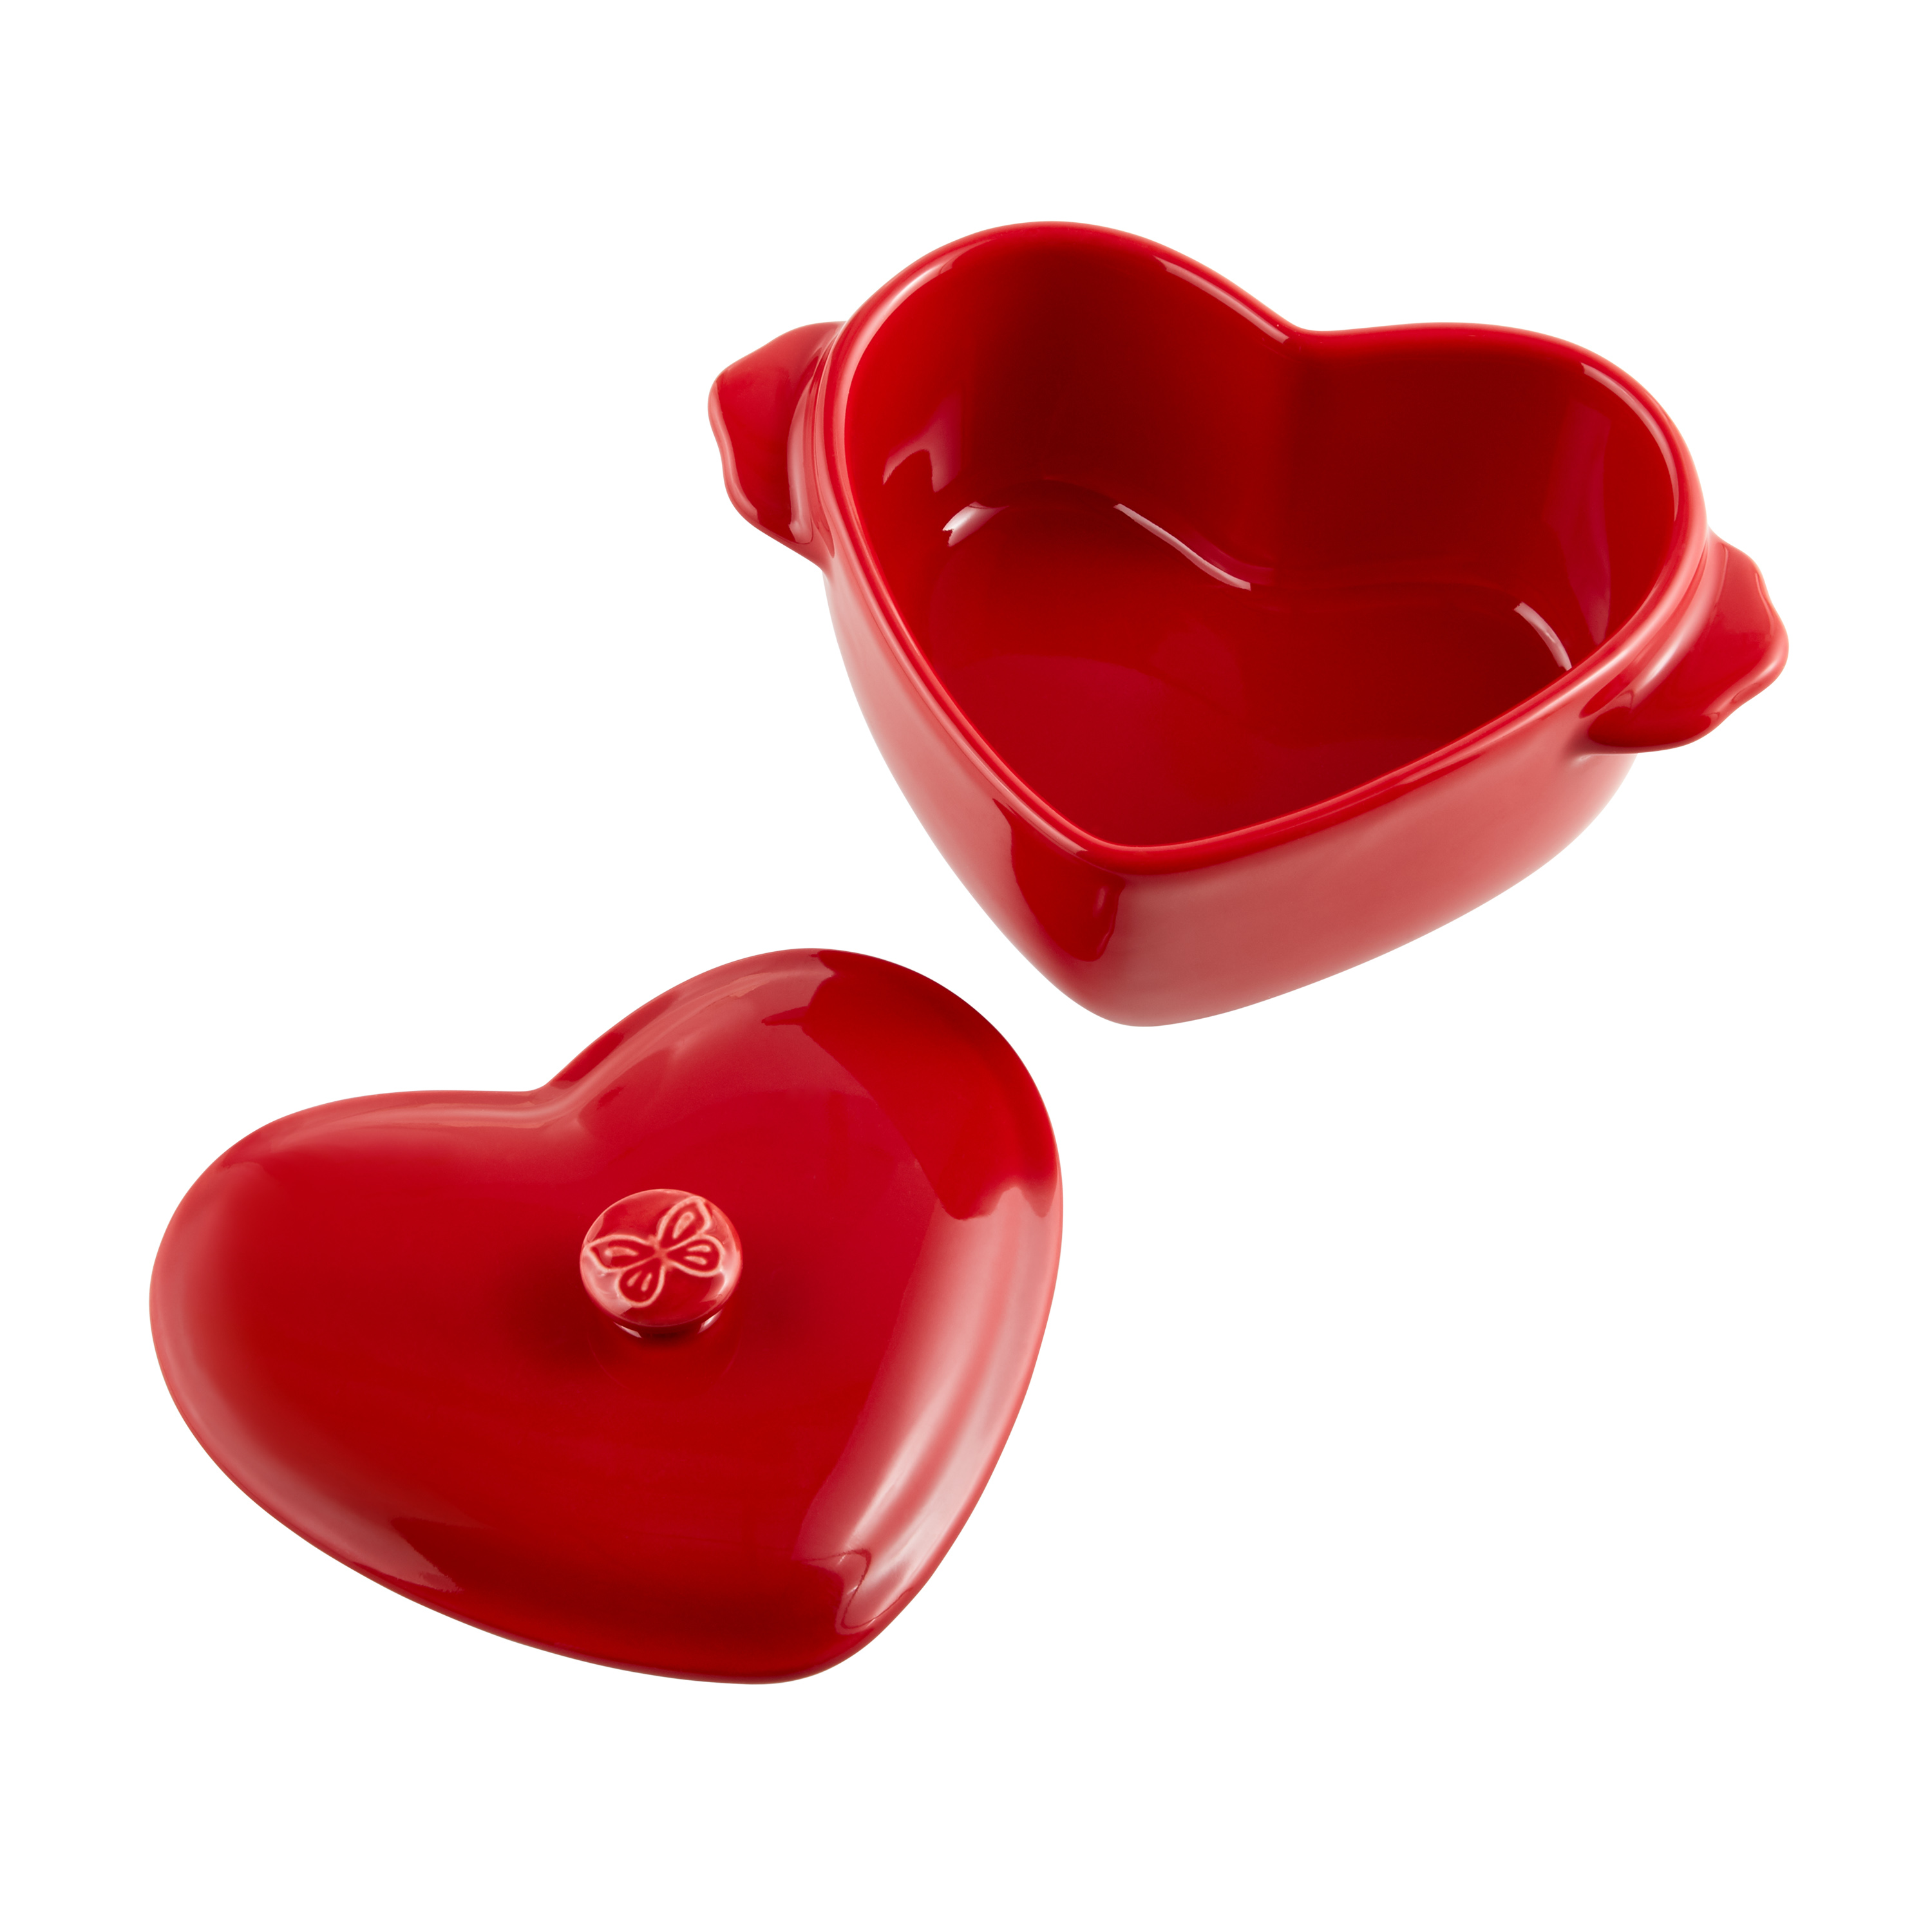 3 Red Mini Heart, Ceramic Baking Dish with Lid, The Pioneer Woman 6.45" - image 3 of 7